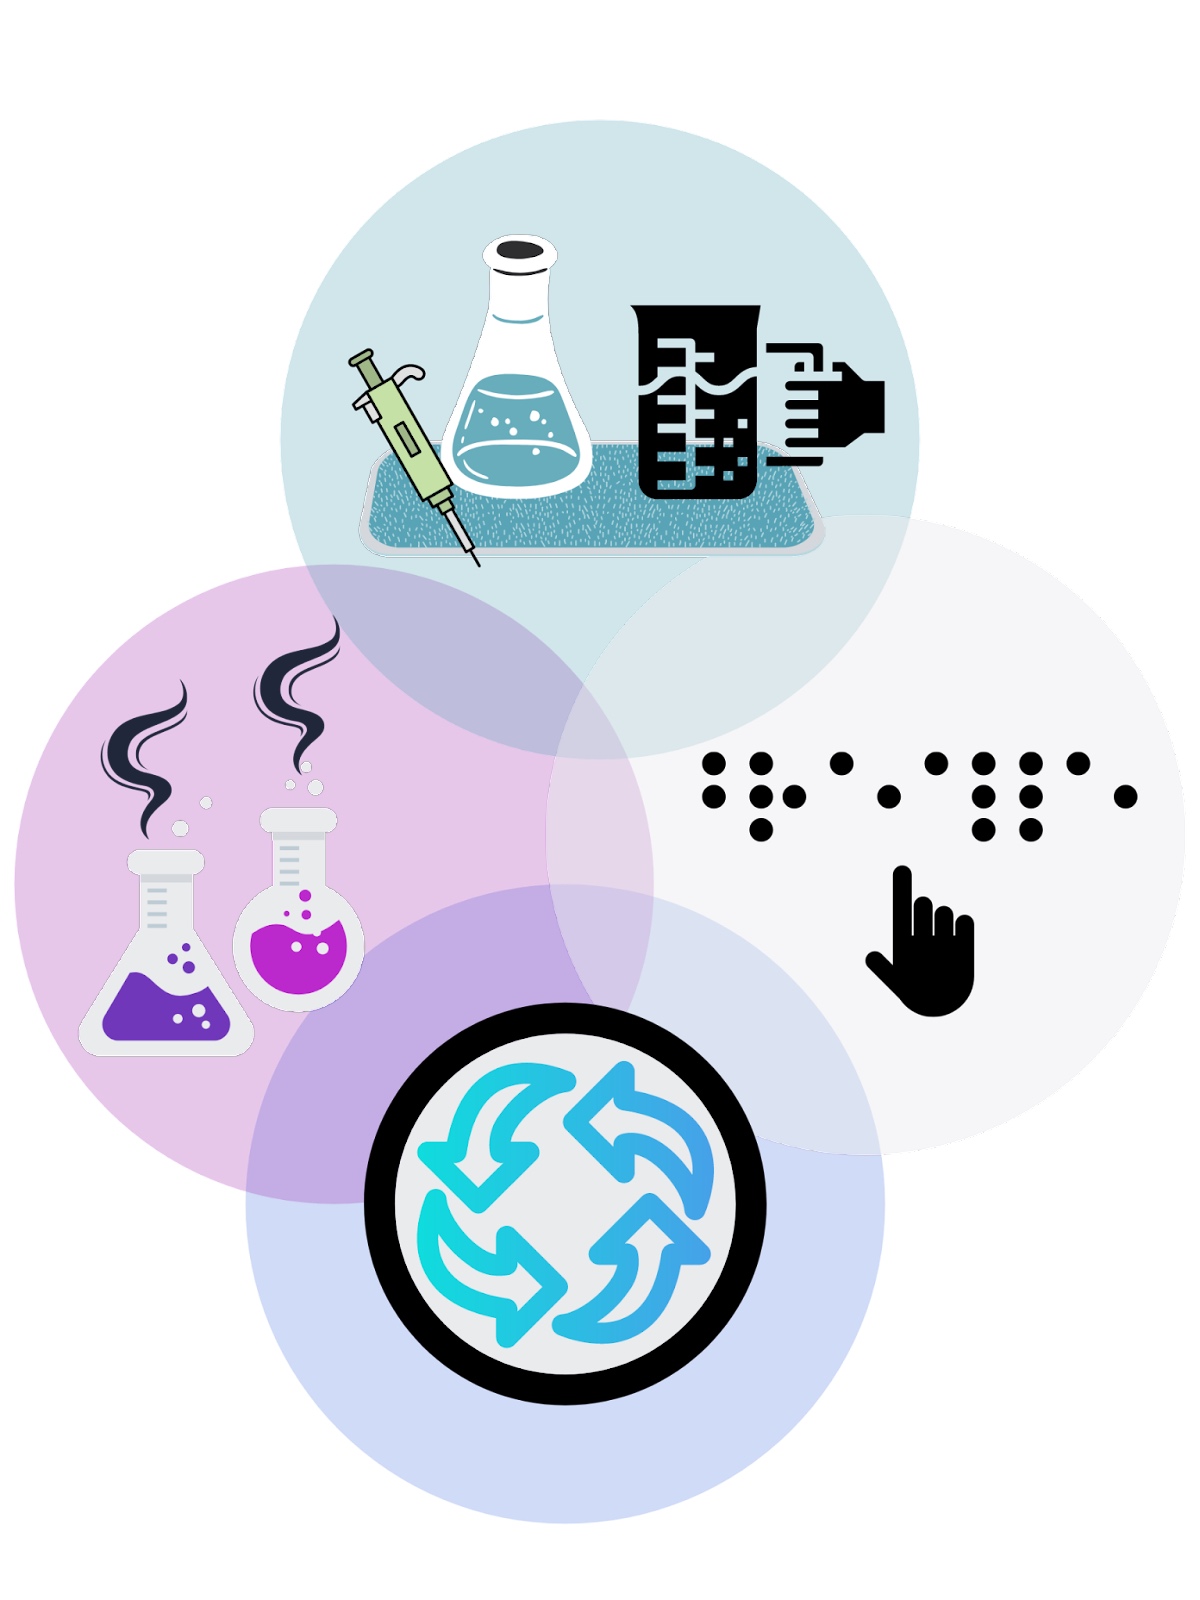 4 slightly overlapping, highly transparent circles with cartoon images inside. The top circle is light blue and shows a cartoon of a green micropipette, white beaker with blue liquid, and black beaker with a hand holding the handle on a blue sticky mat. The right circle is light grey with a cartoon of black braille and a hand. The bottom circle is navy blue with a grey circle with blue counter-clockwise arrows inside. The left circle is pink with 2 grey beakers, one with purple liquid and one with pink liquid, and black odor lines.